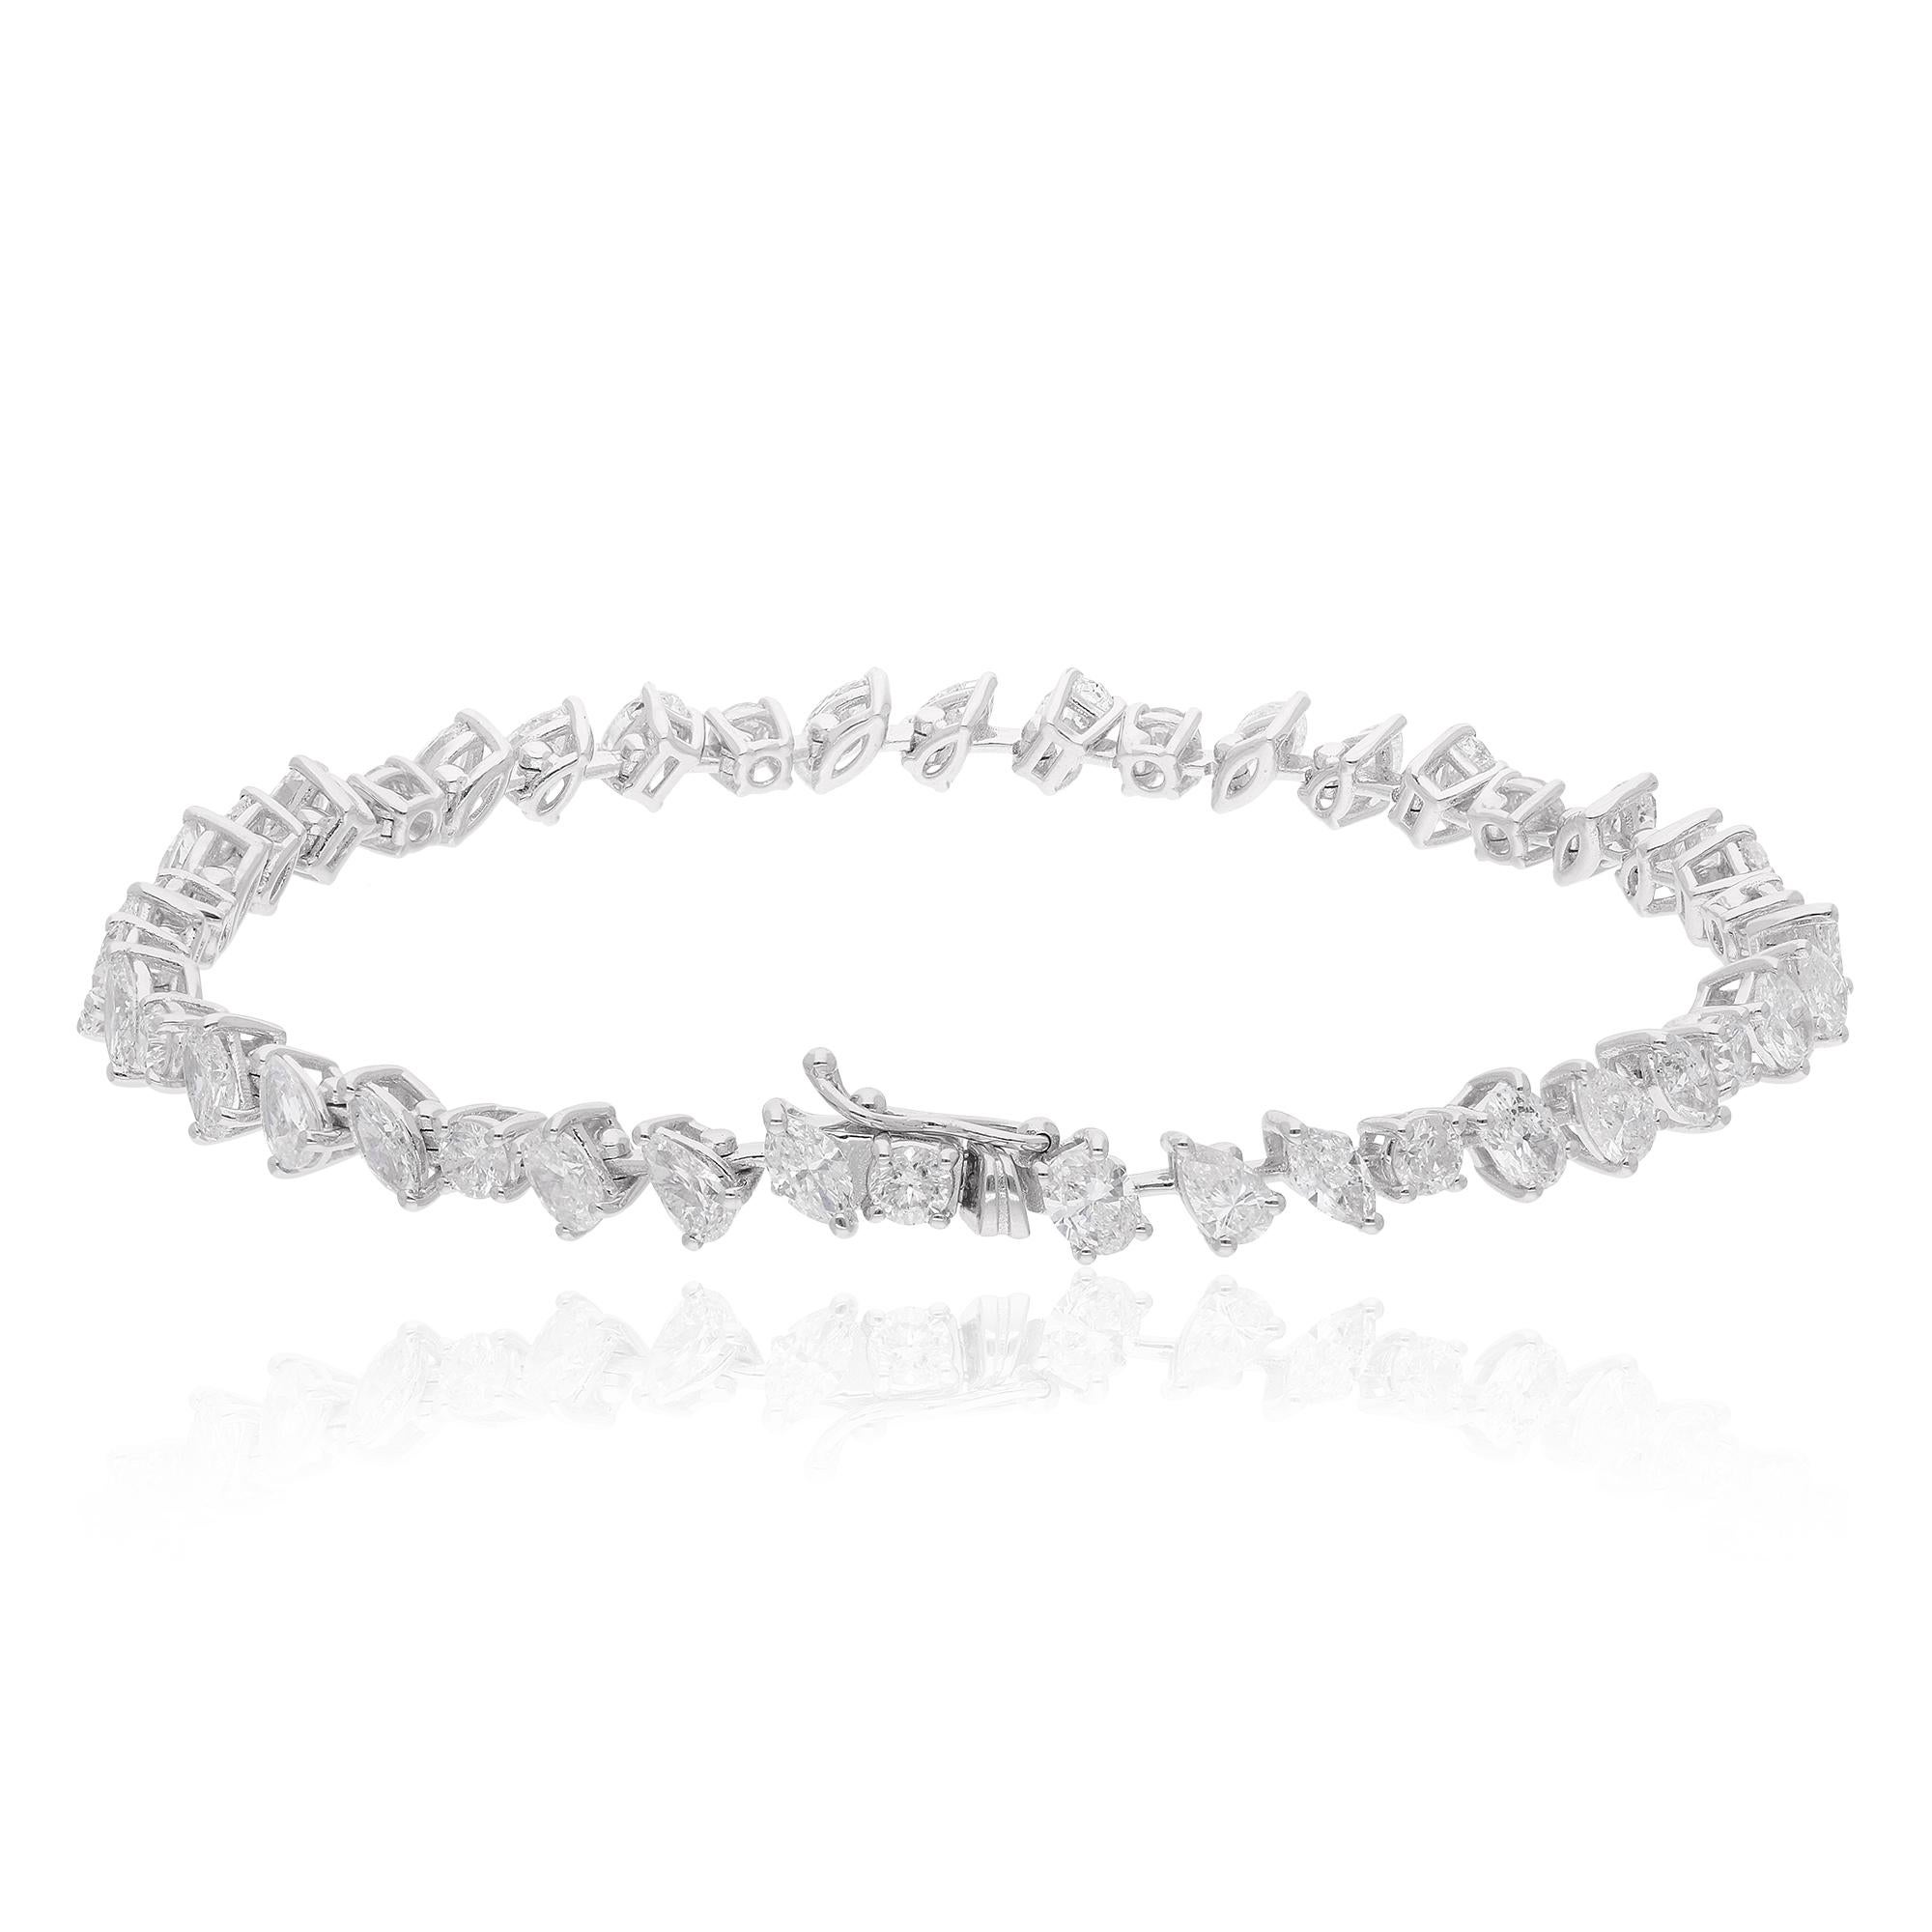 Item Code :- SEBR-43465
Gross Wt. :- 12.07 gm
18k White Gold Wt. :- 10.77 gm
Natural Diamond Wt. :- 6.48 Ct.  (AVERAGE DIAMOND CLARITY SI1-SI2 AND COLOR H-I)
Bracelet Length :- 7 Inches Long

✦ Sizing
.....................
We can adjust most items